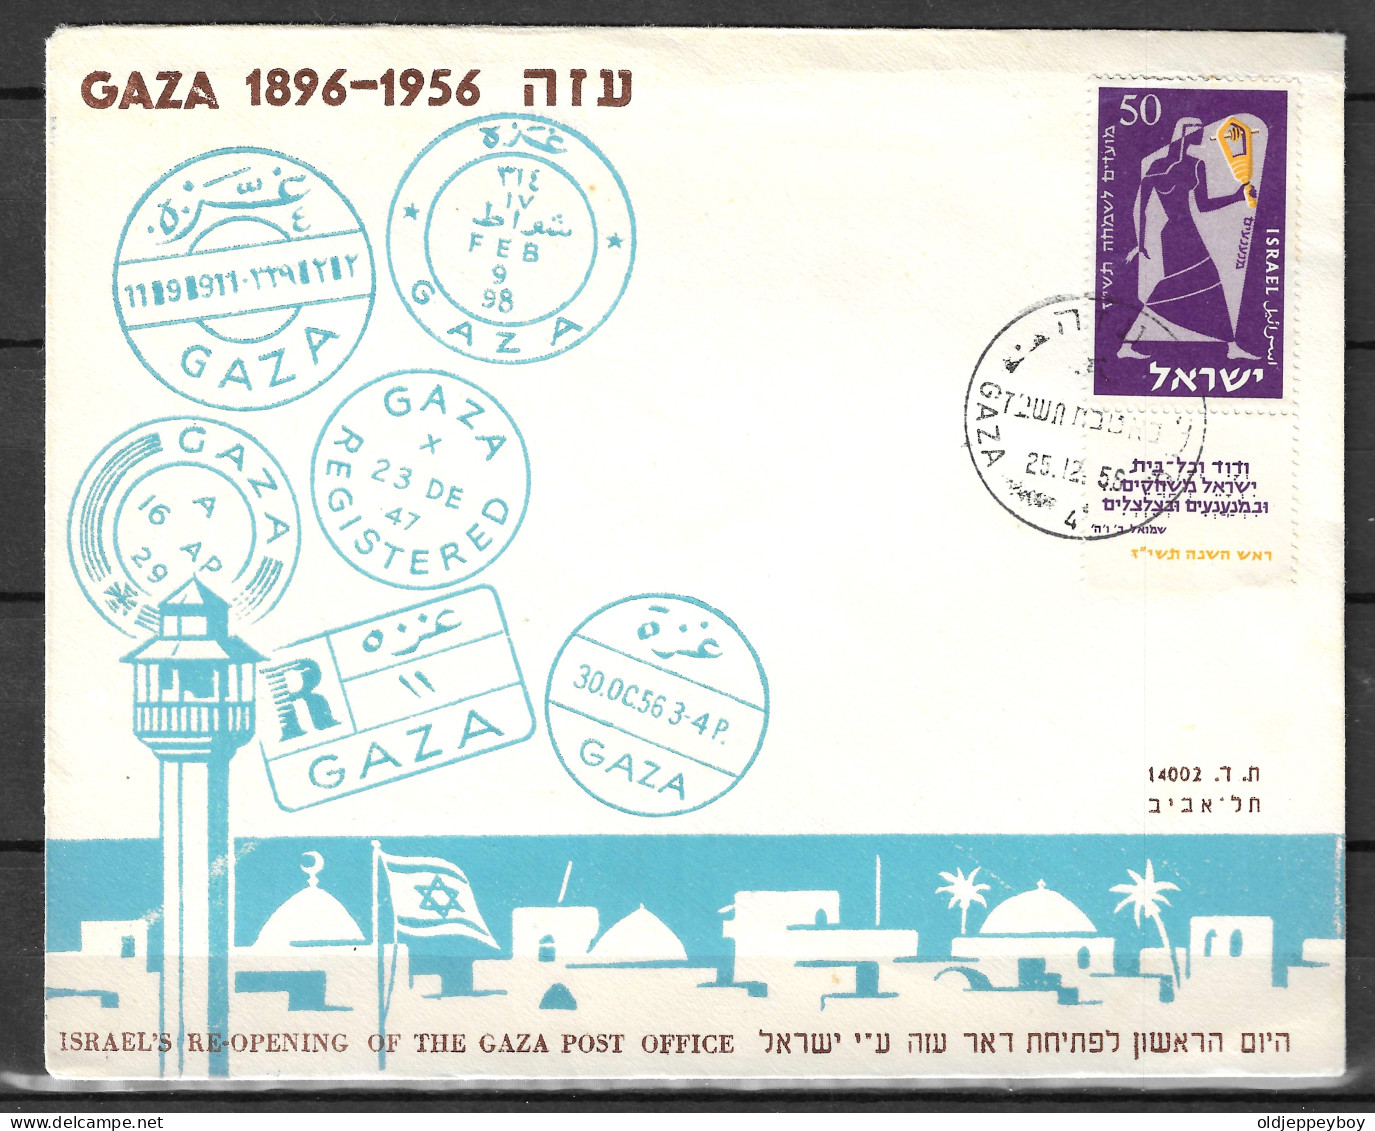 1956 POO FIRST DAY POST OFFICE OPENING PALESTINE GAZA STRIP MAIL STAMP ENVELOPE ISRAEL JUDAICA CACHET COVER - Covers & Documents